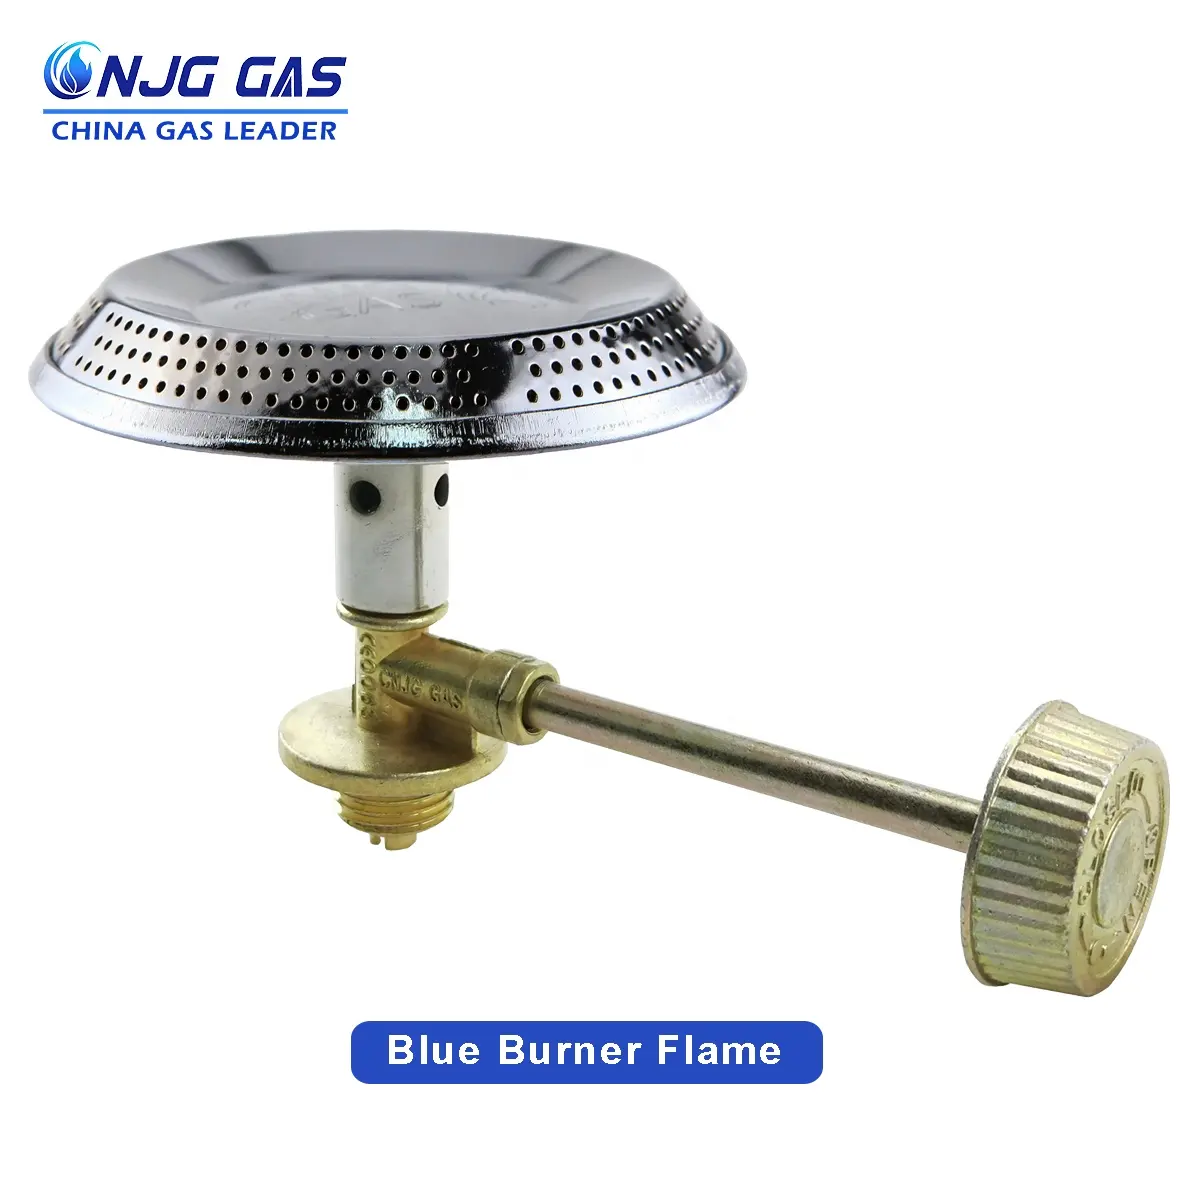 CNJG Kenya Ghana Cheap Single Mini Small LPG Gas Burners Heads With Zinc Valve Portable Camping Gas Stove for 6KG Cylinder